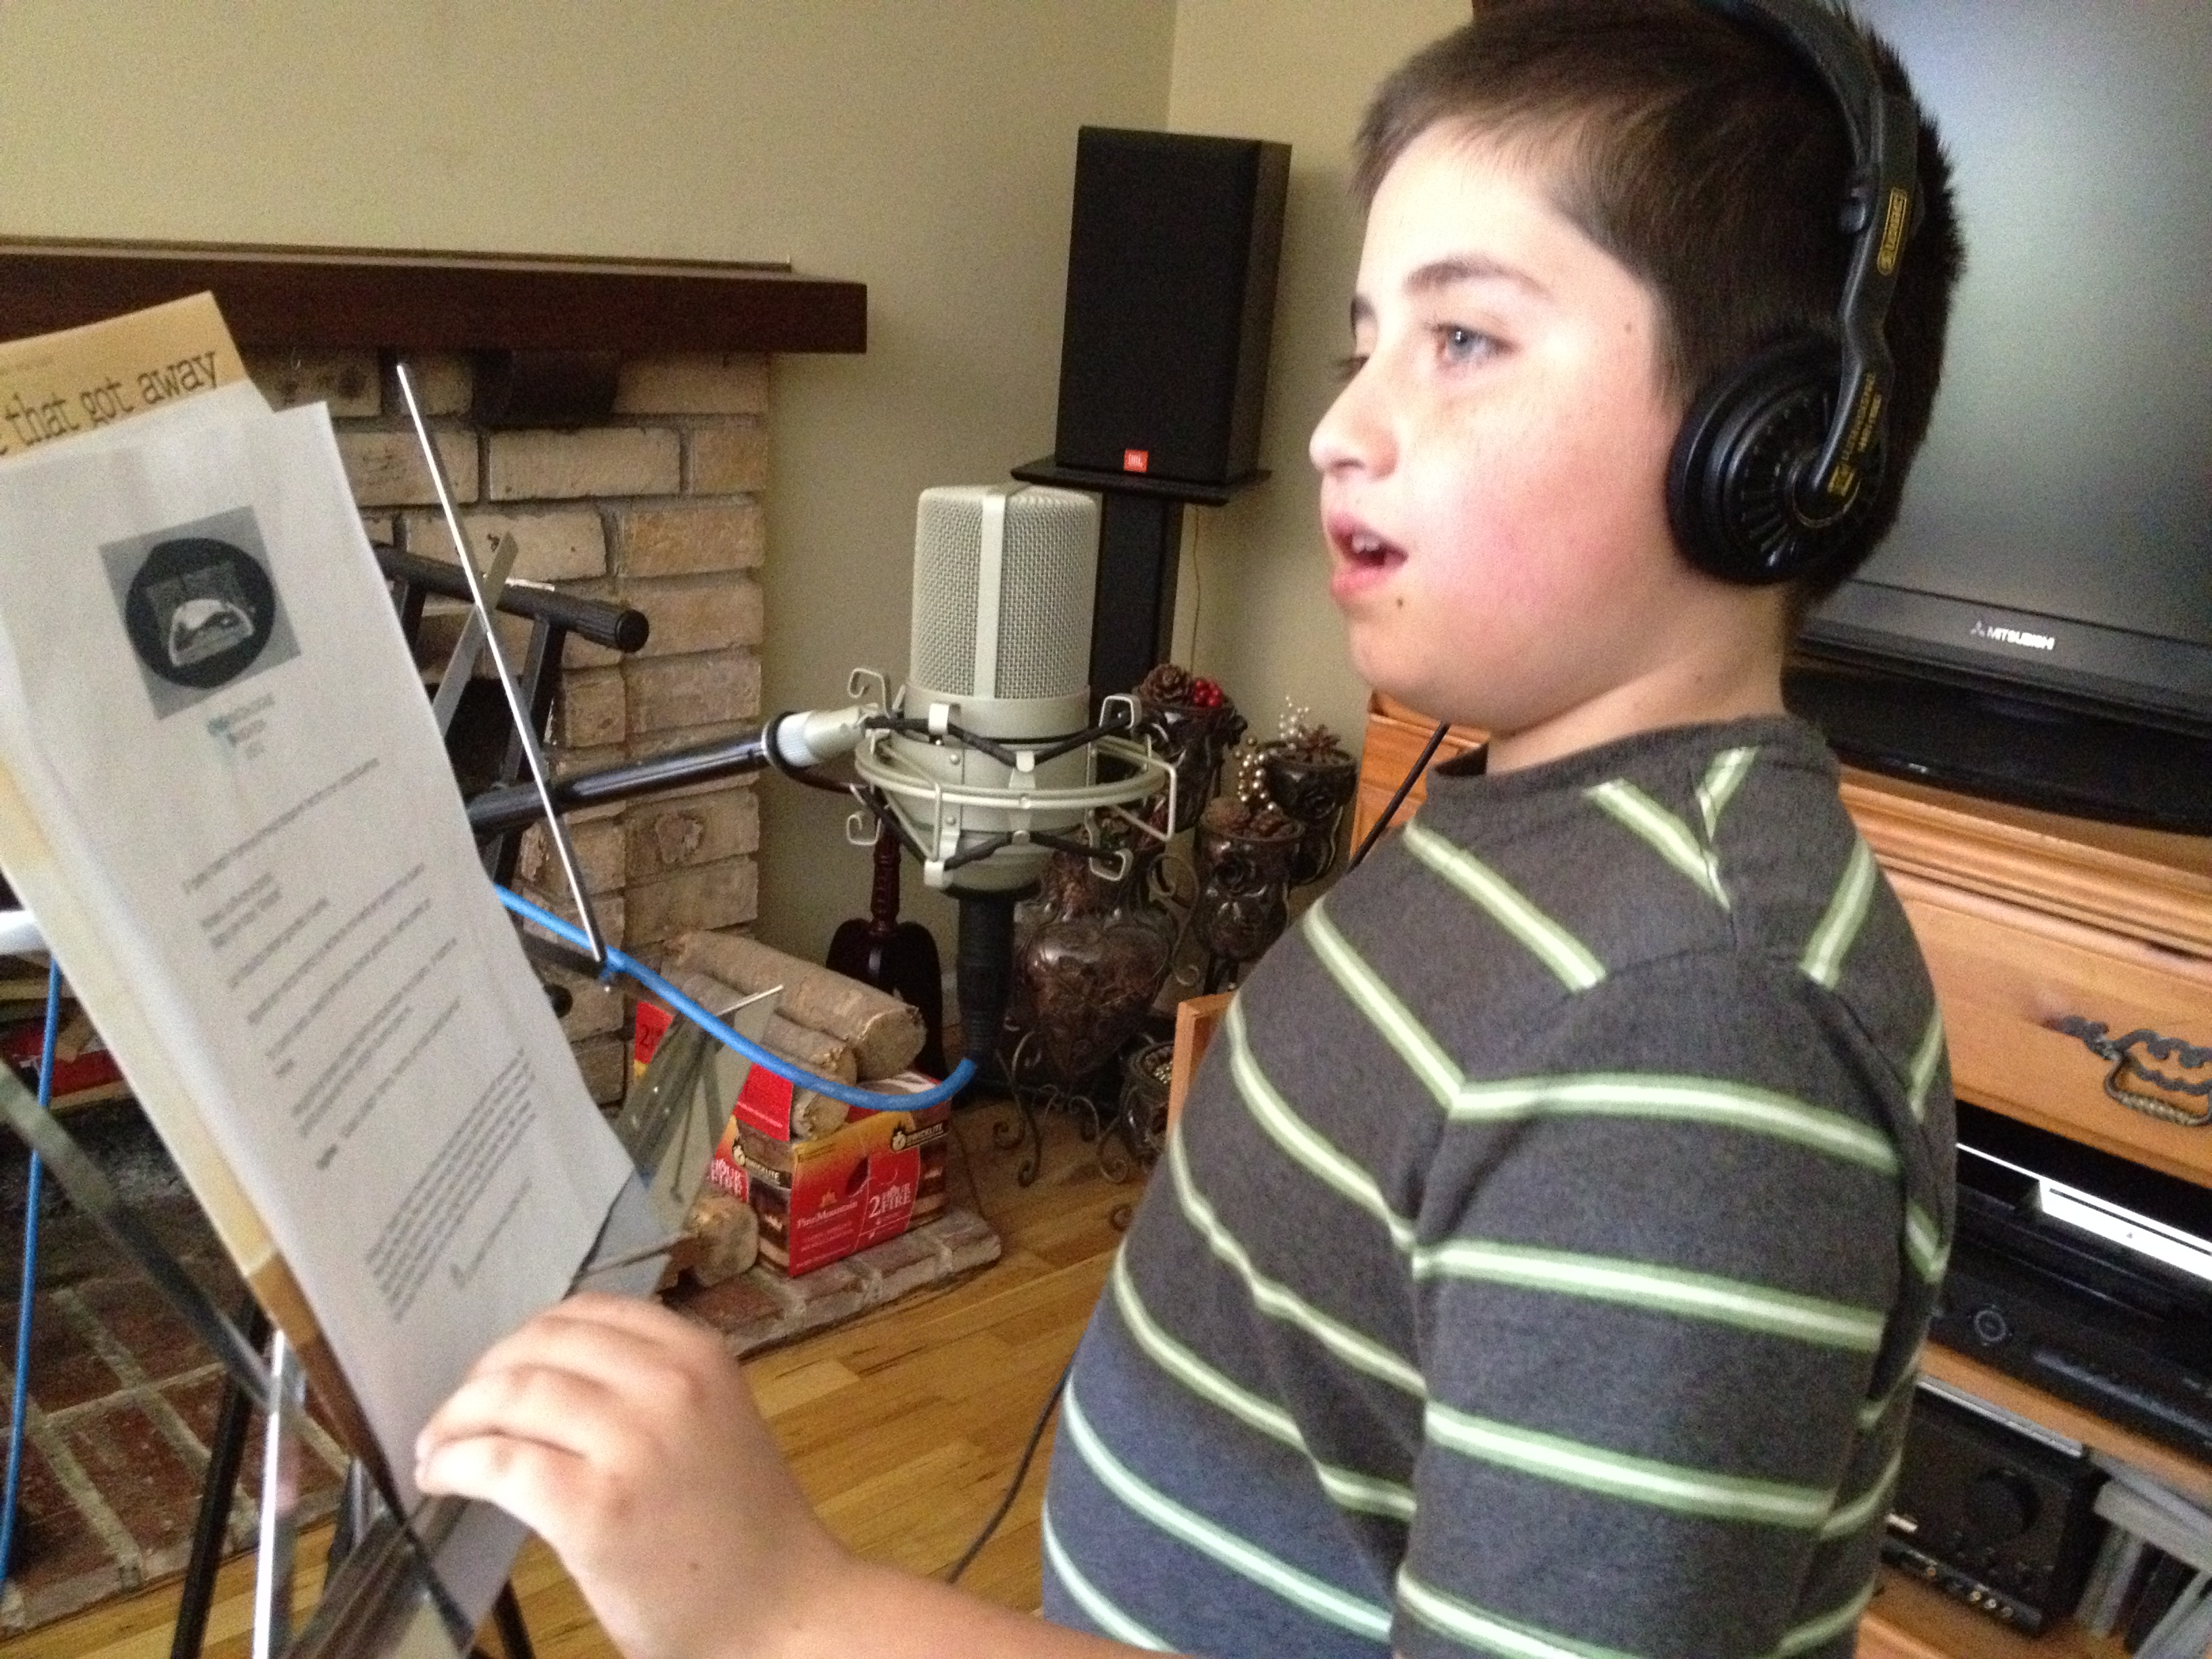 Christian recording a voice-over for Joseph Farms in Spanish.